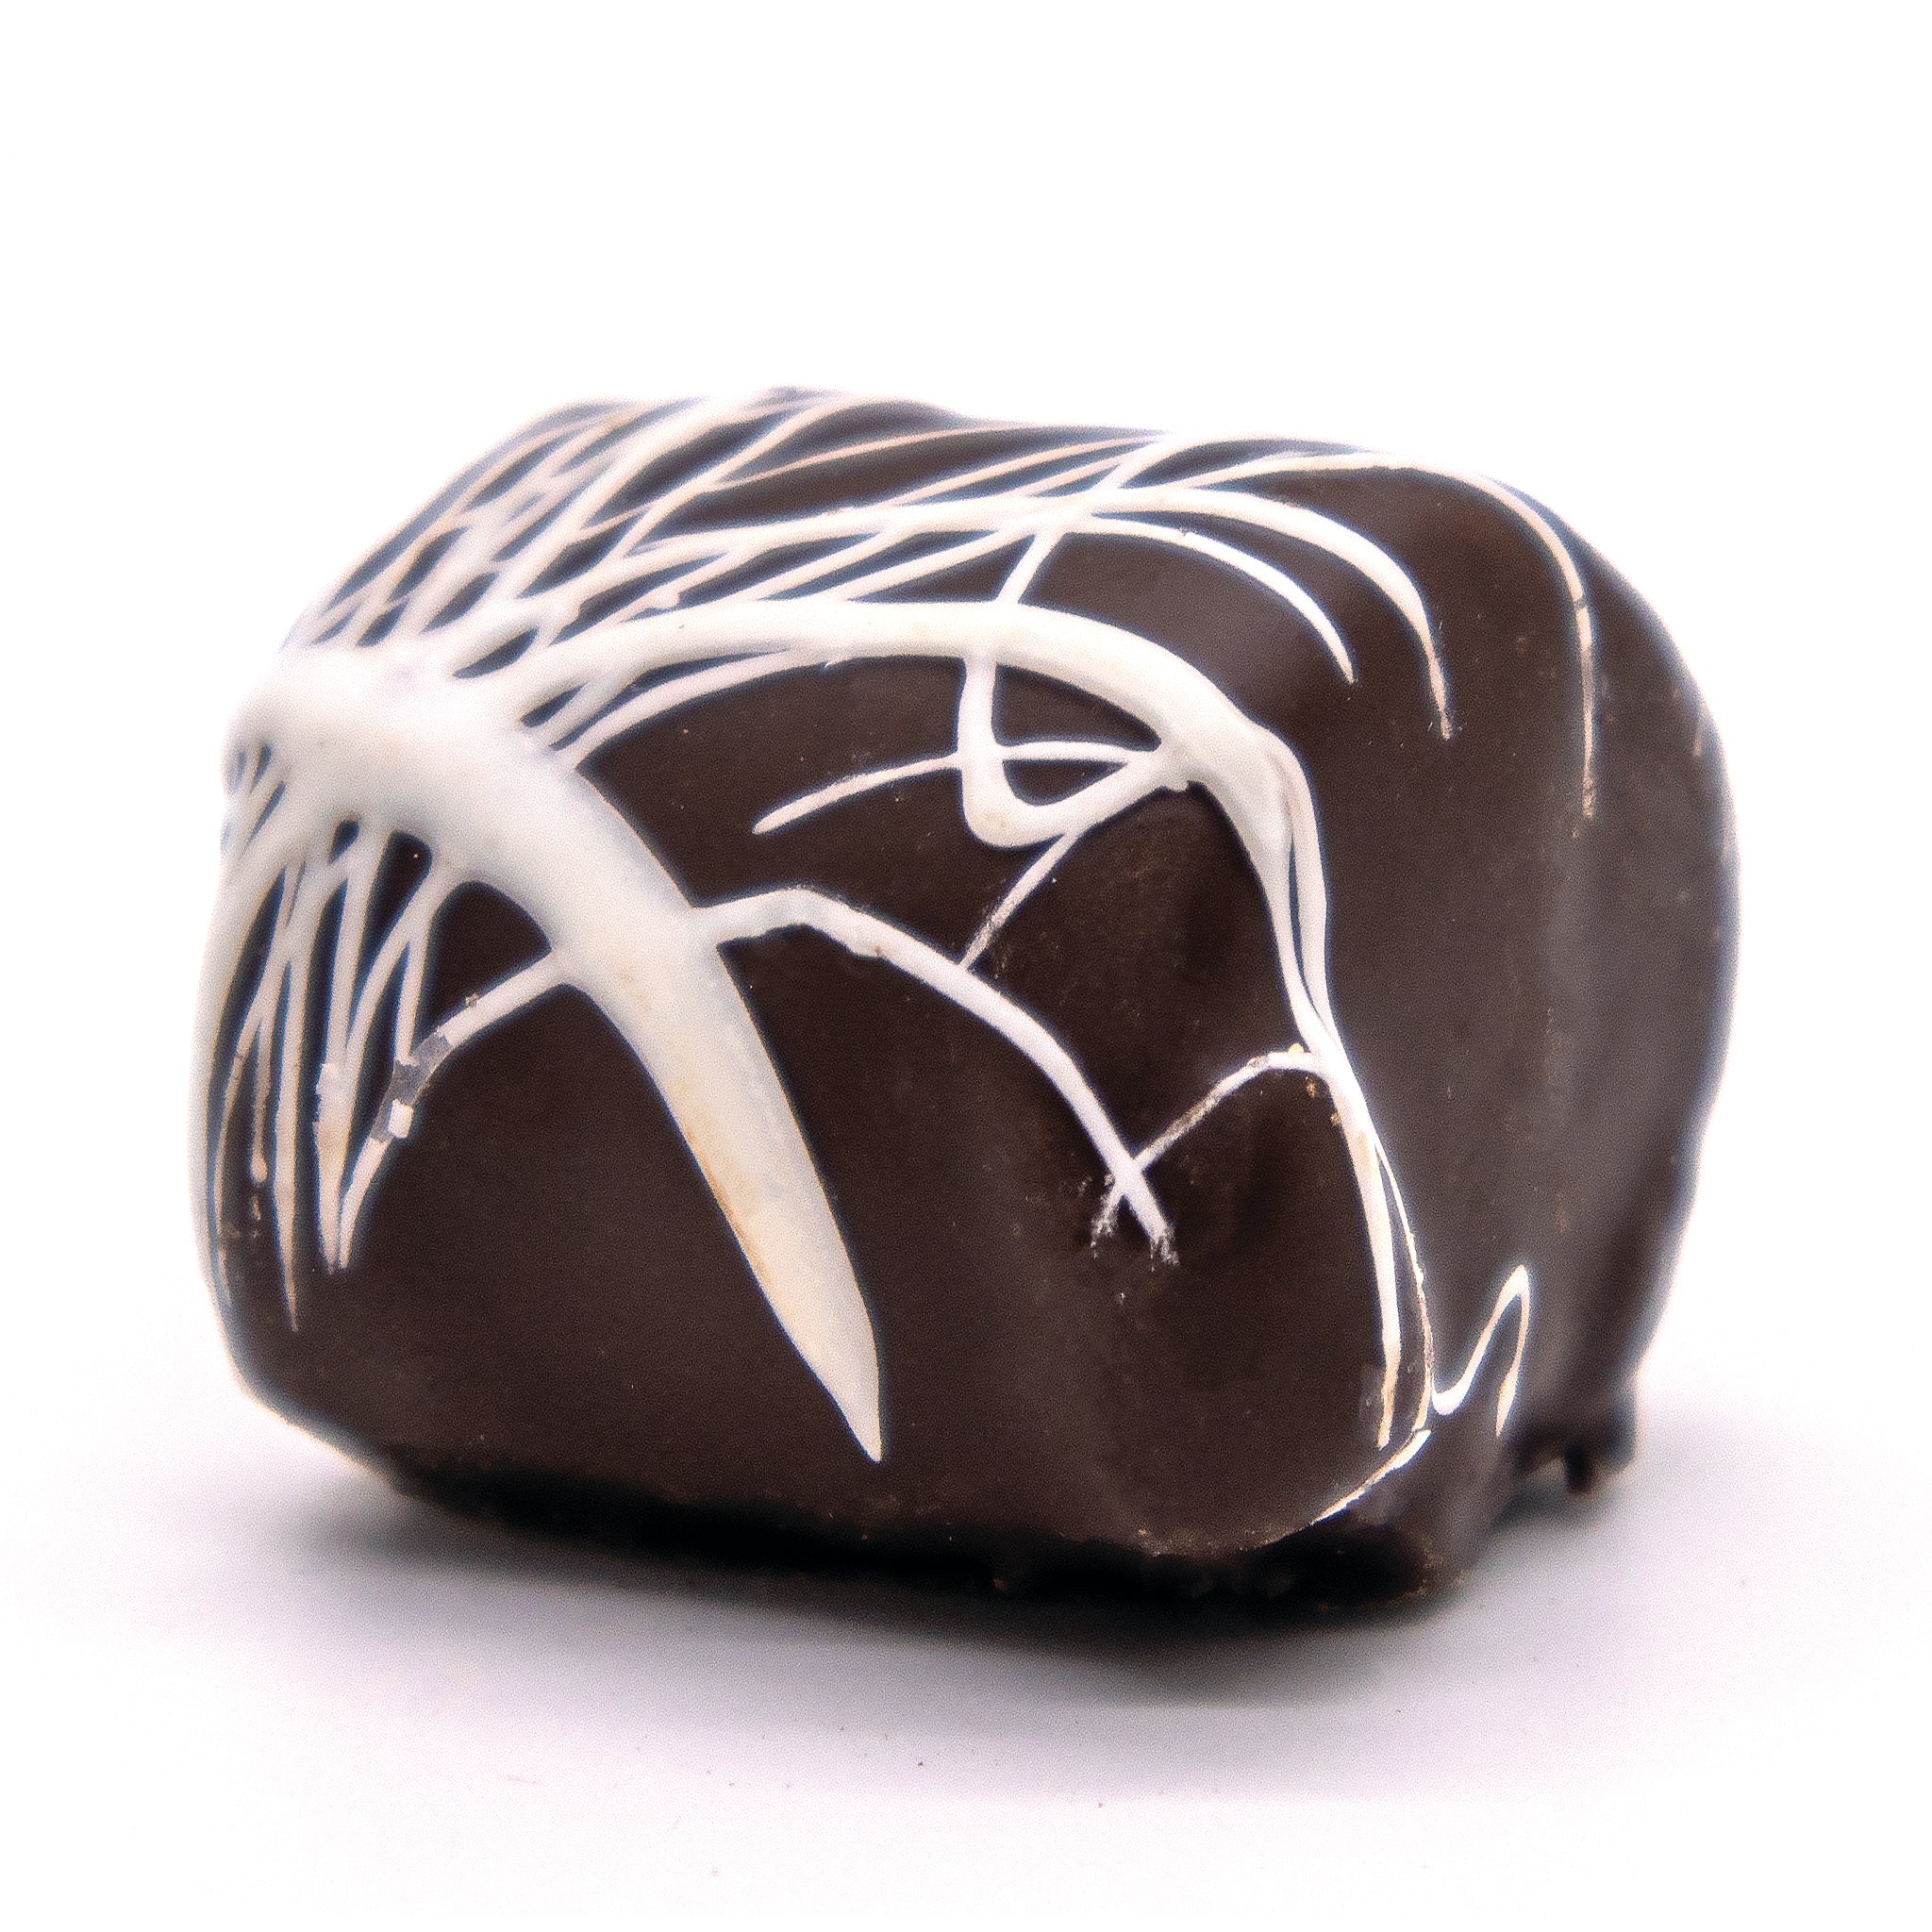 Chocolate Covered Mallow